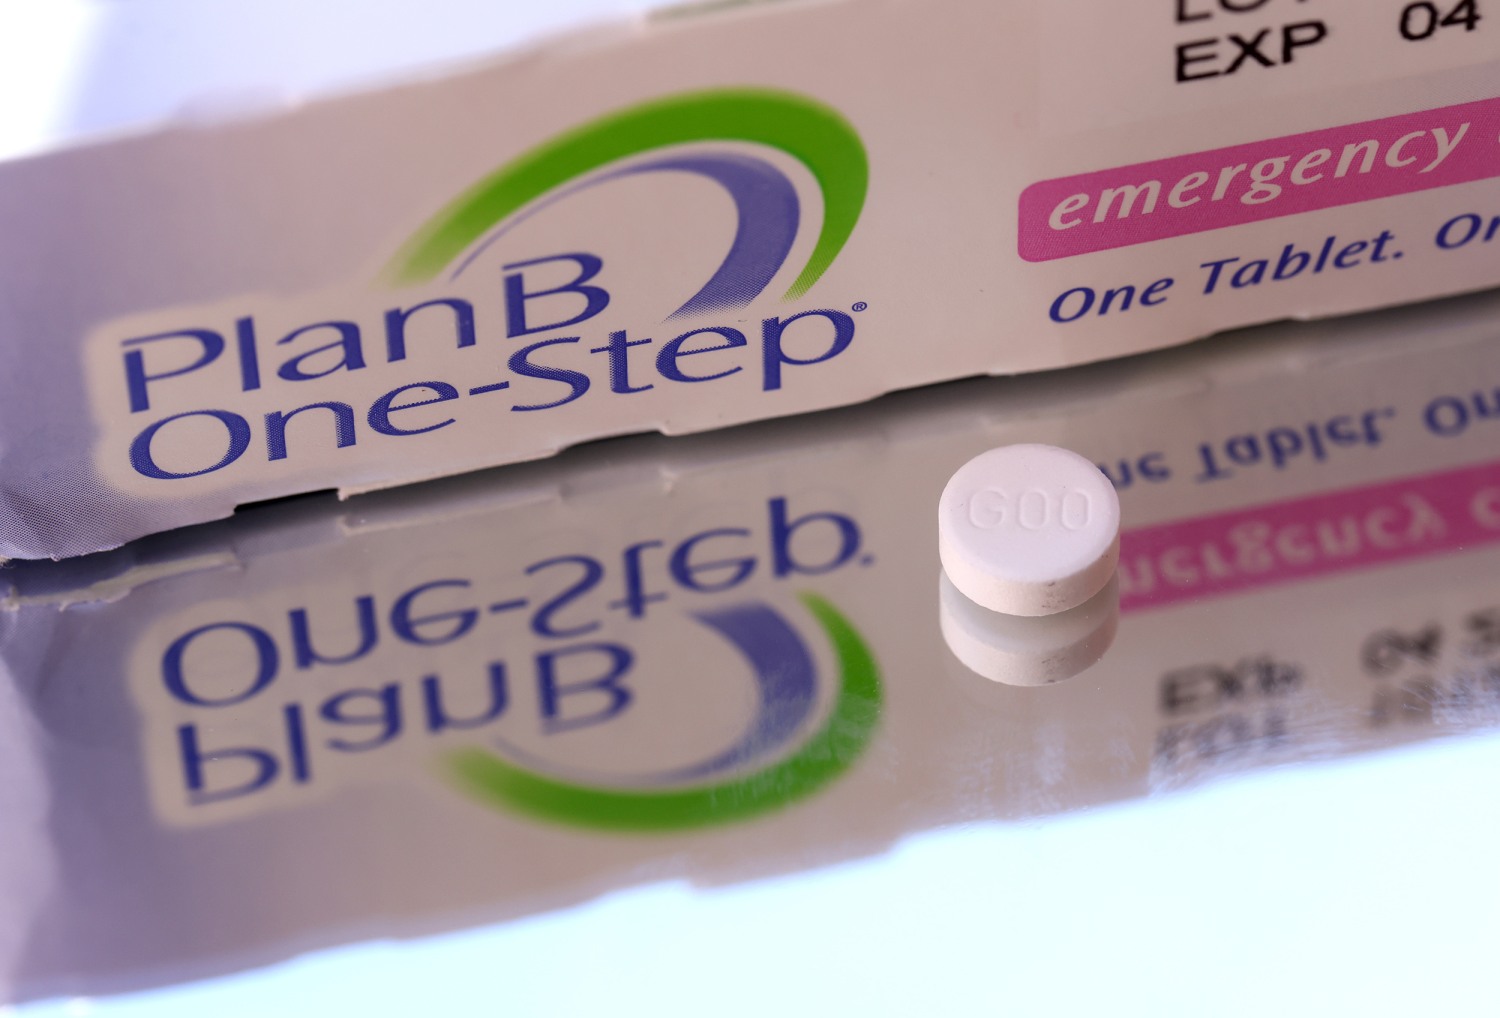 Is It Safe To Take Plan B After An Abortion? - Her Smart Choice